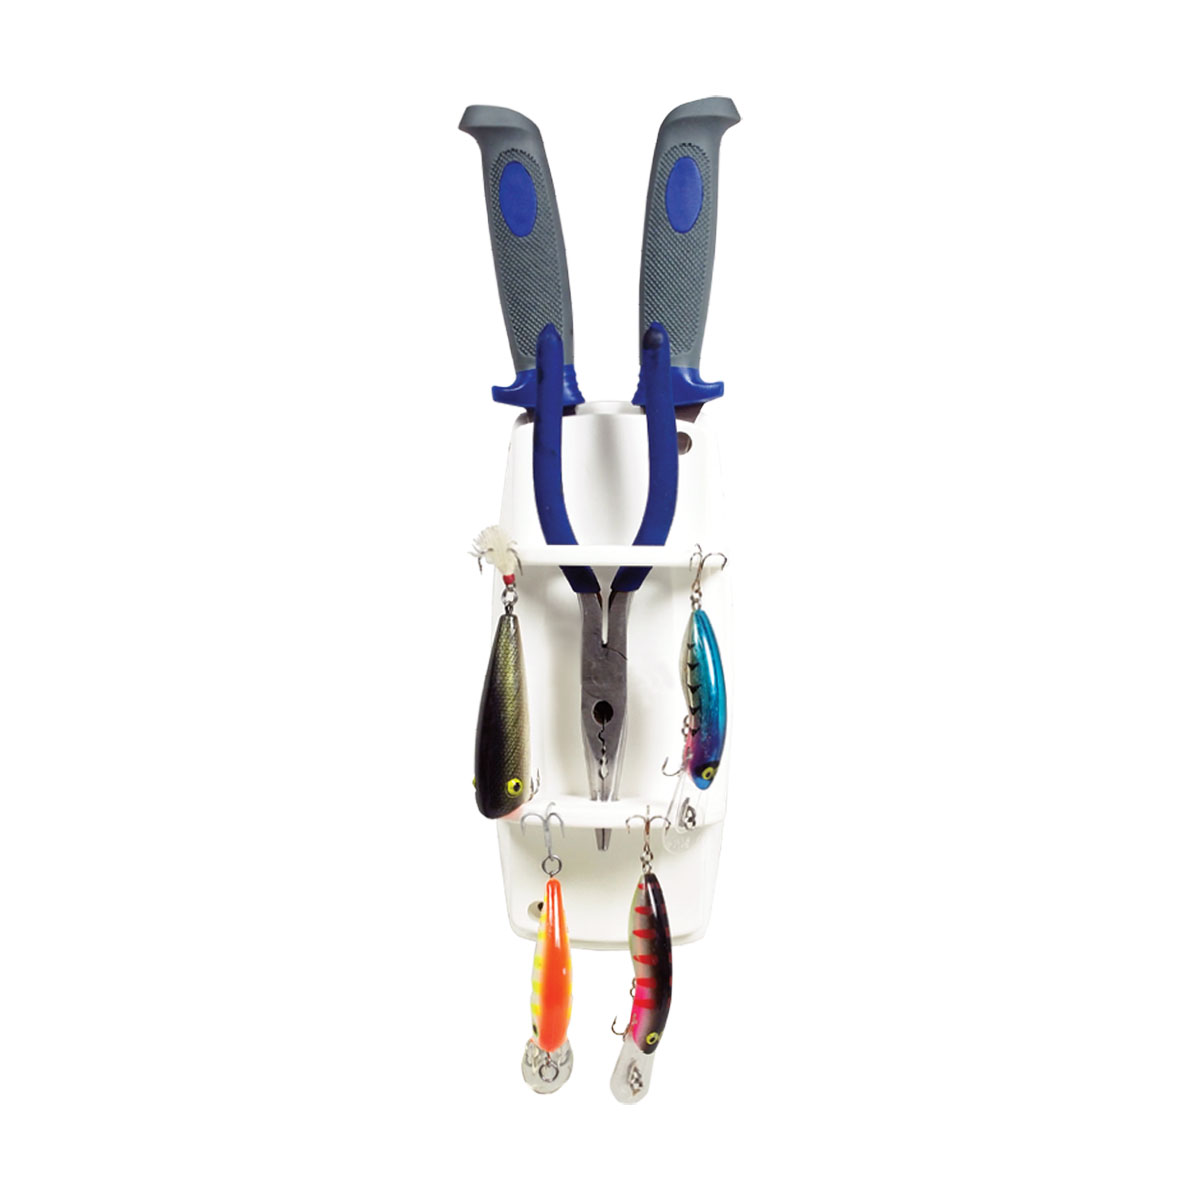 BLA Knife Pliers and Lure Holder - BLA